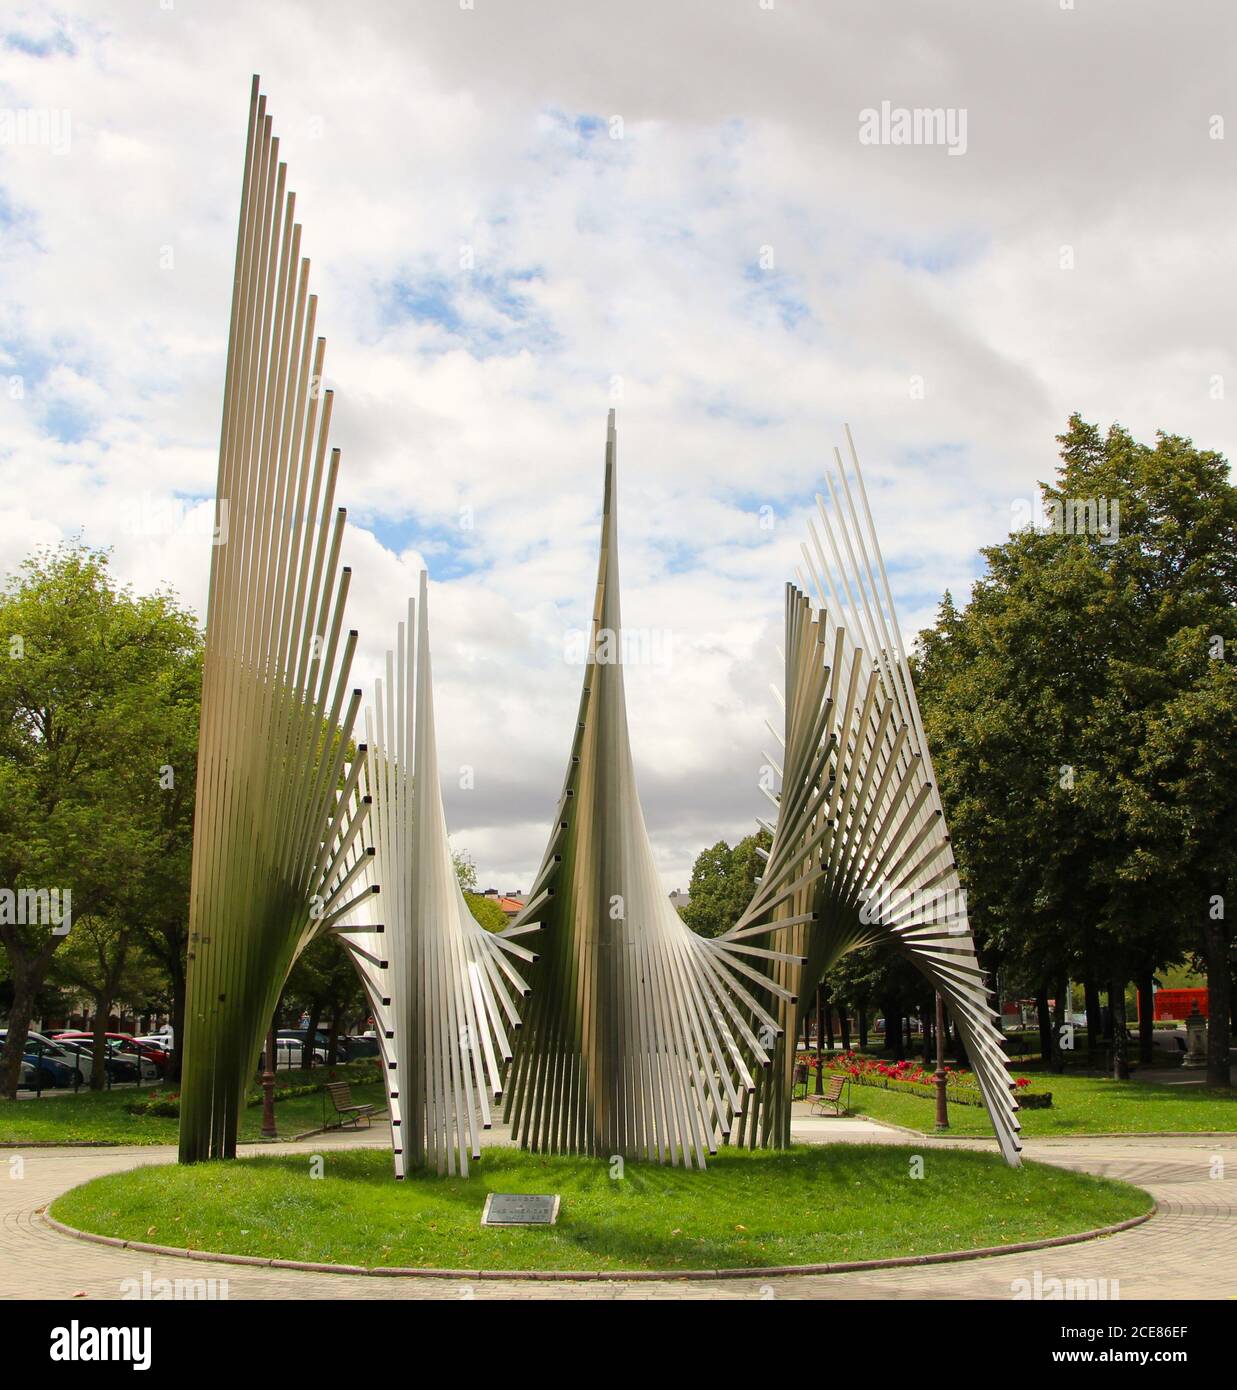 Monument for the Americas stainless steel sculpture in the Garden of the Americas in Burgos Castile and Leon Spain Stock Photo